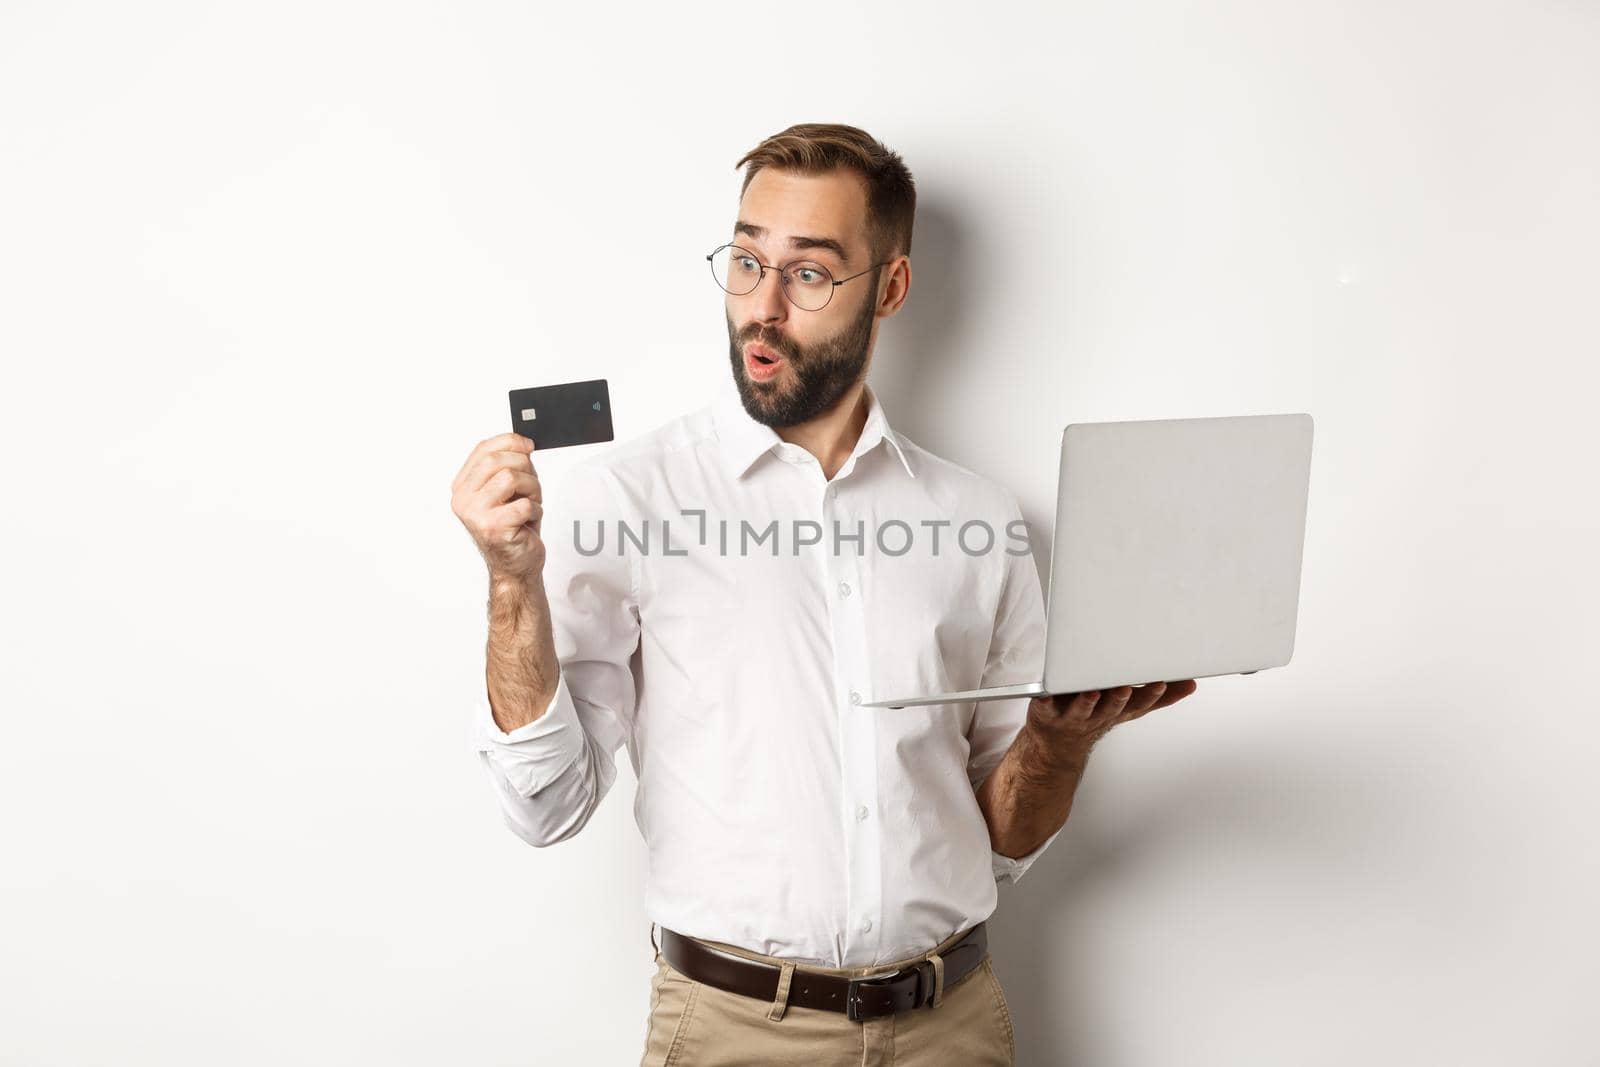 Online shopping. Amazed businessman holding laptop, looking impressed at credit card, standing over white background.